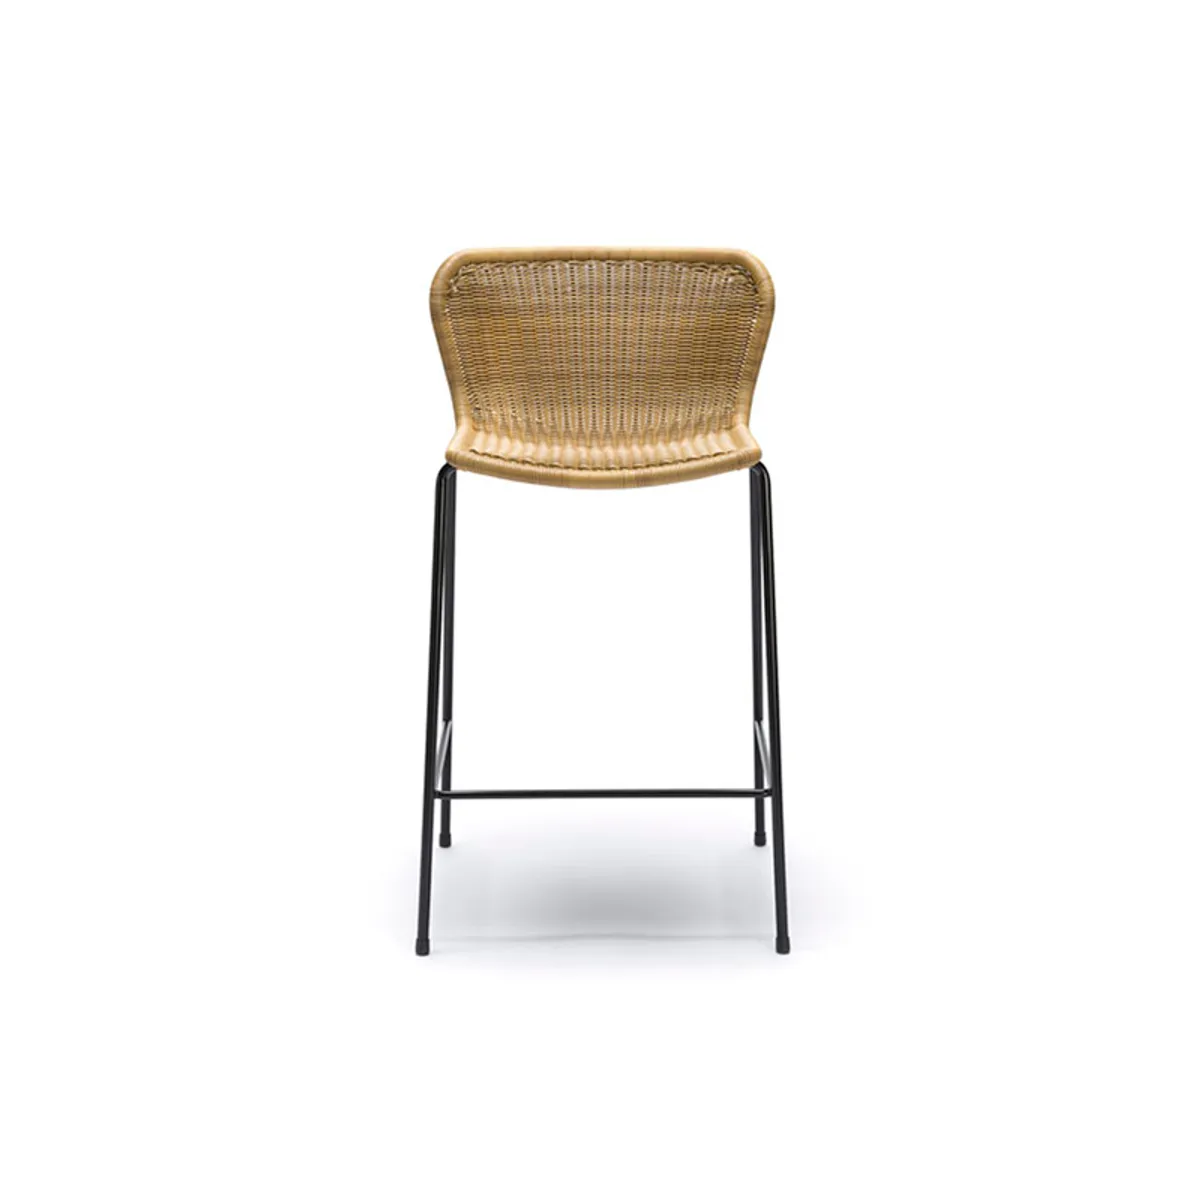 Harriet Bar Stool Wicker Seat With Metal Legs For Outdoor Use 019